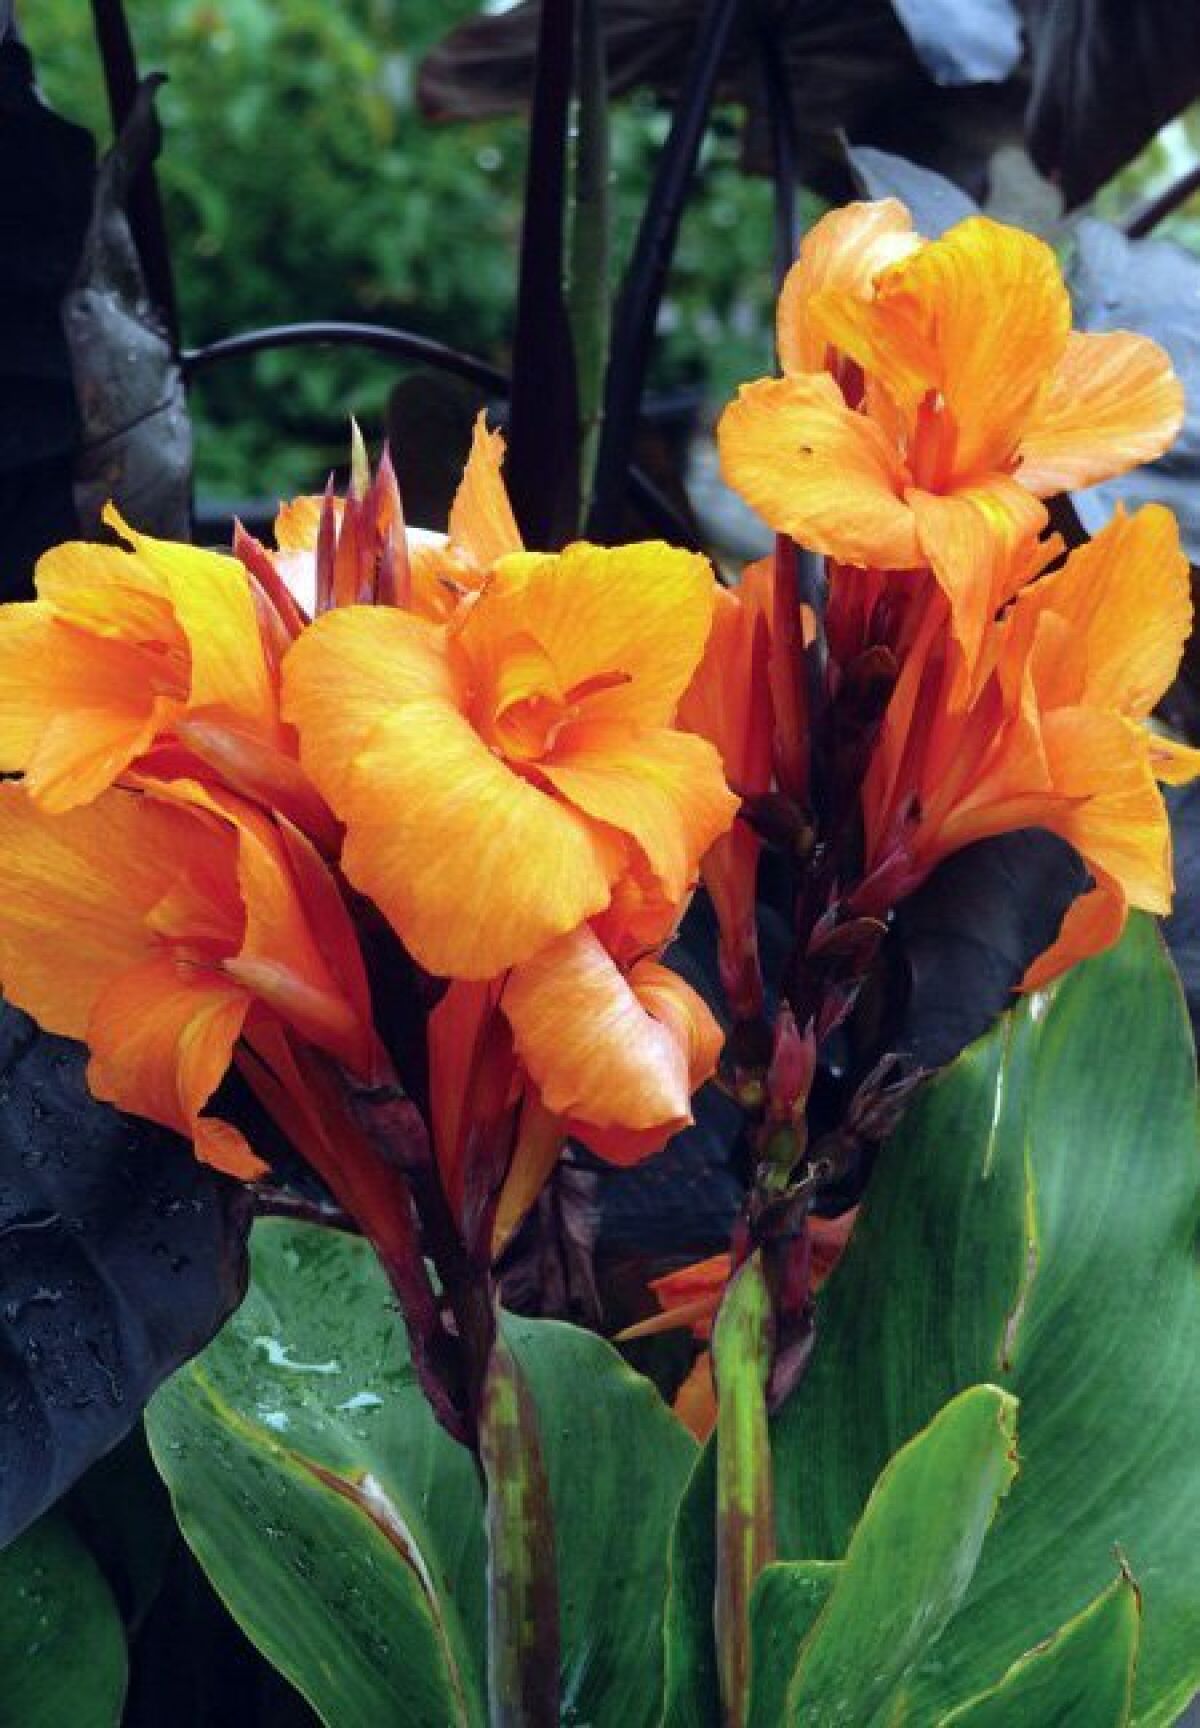 This tangelo canna lily is another tropical plant that thrives in San Diego gardens.